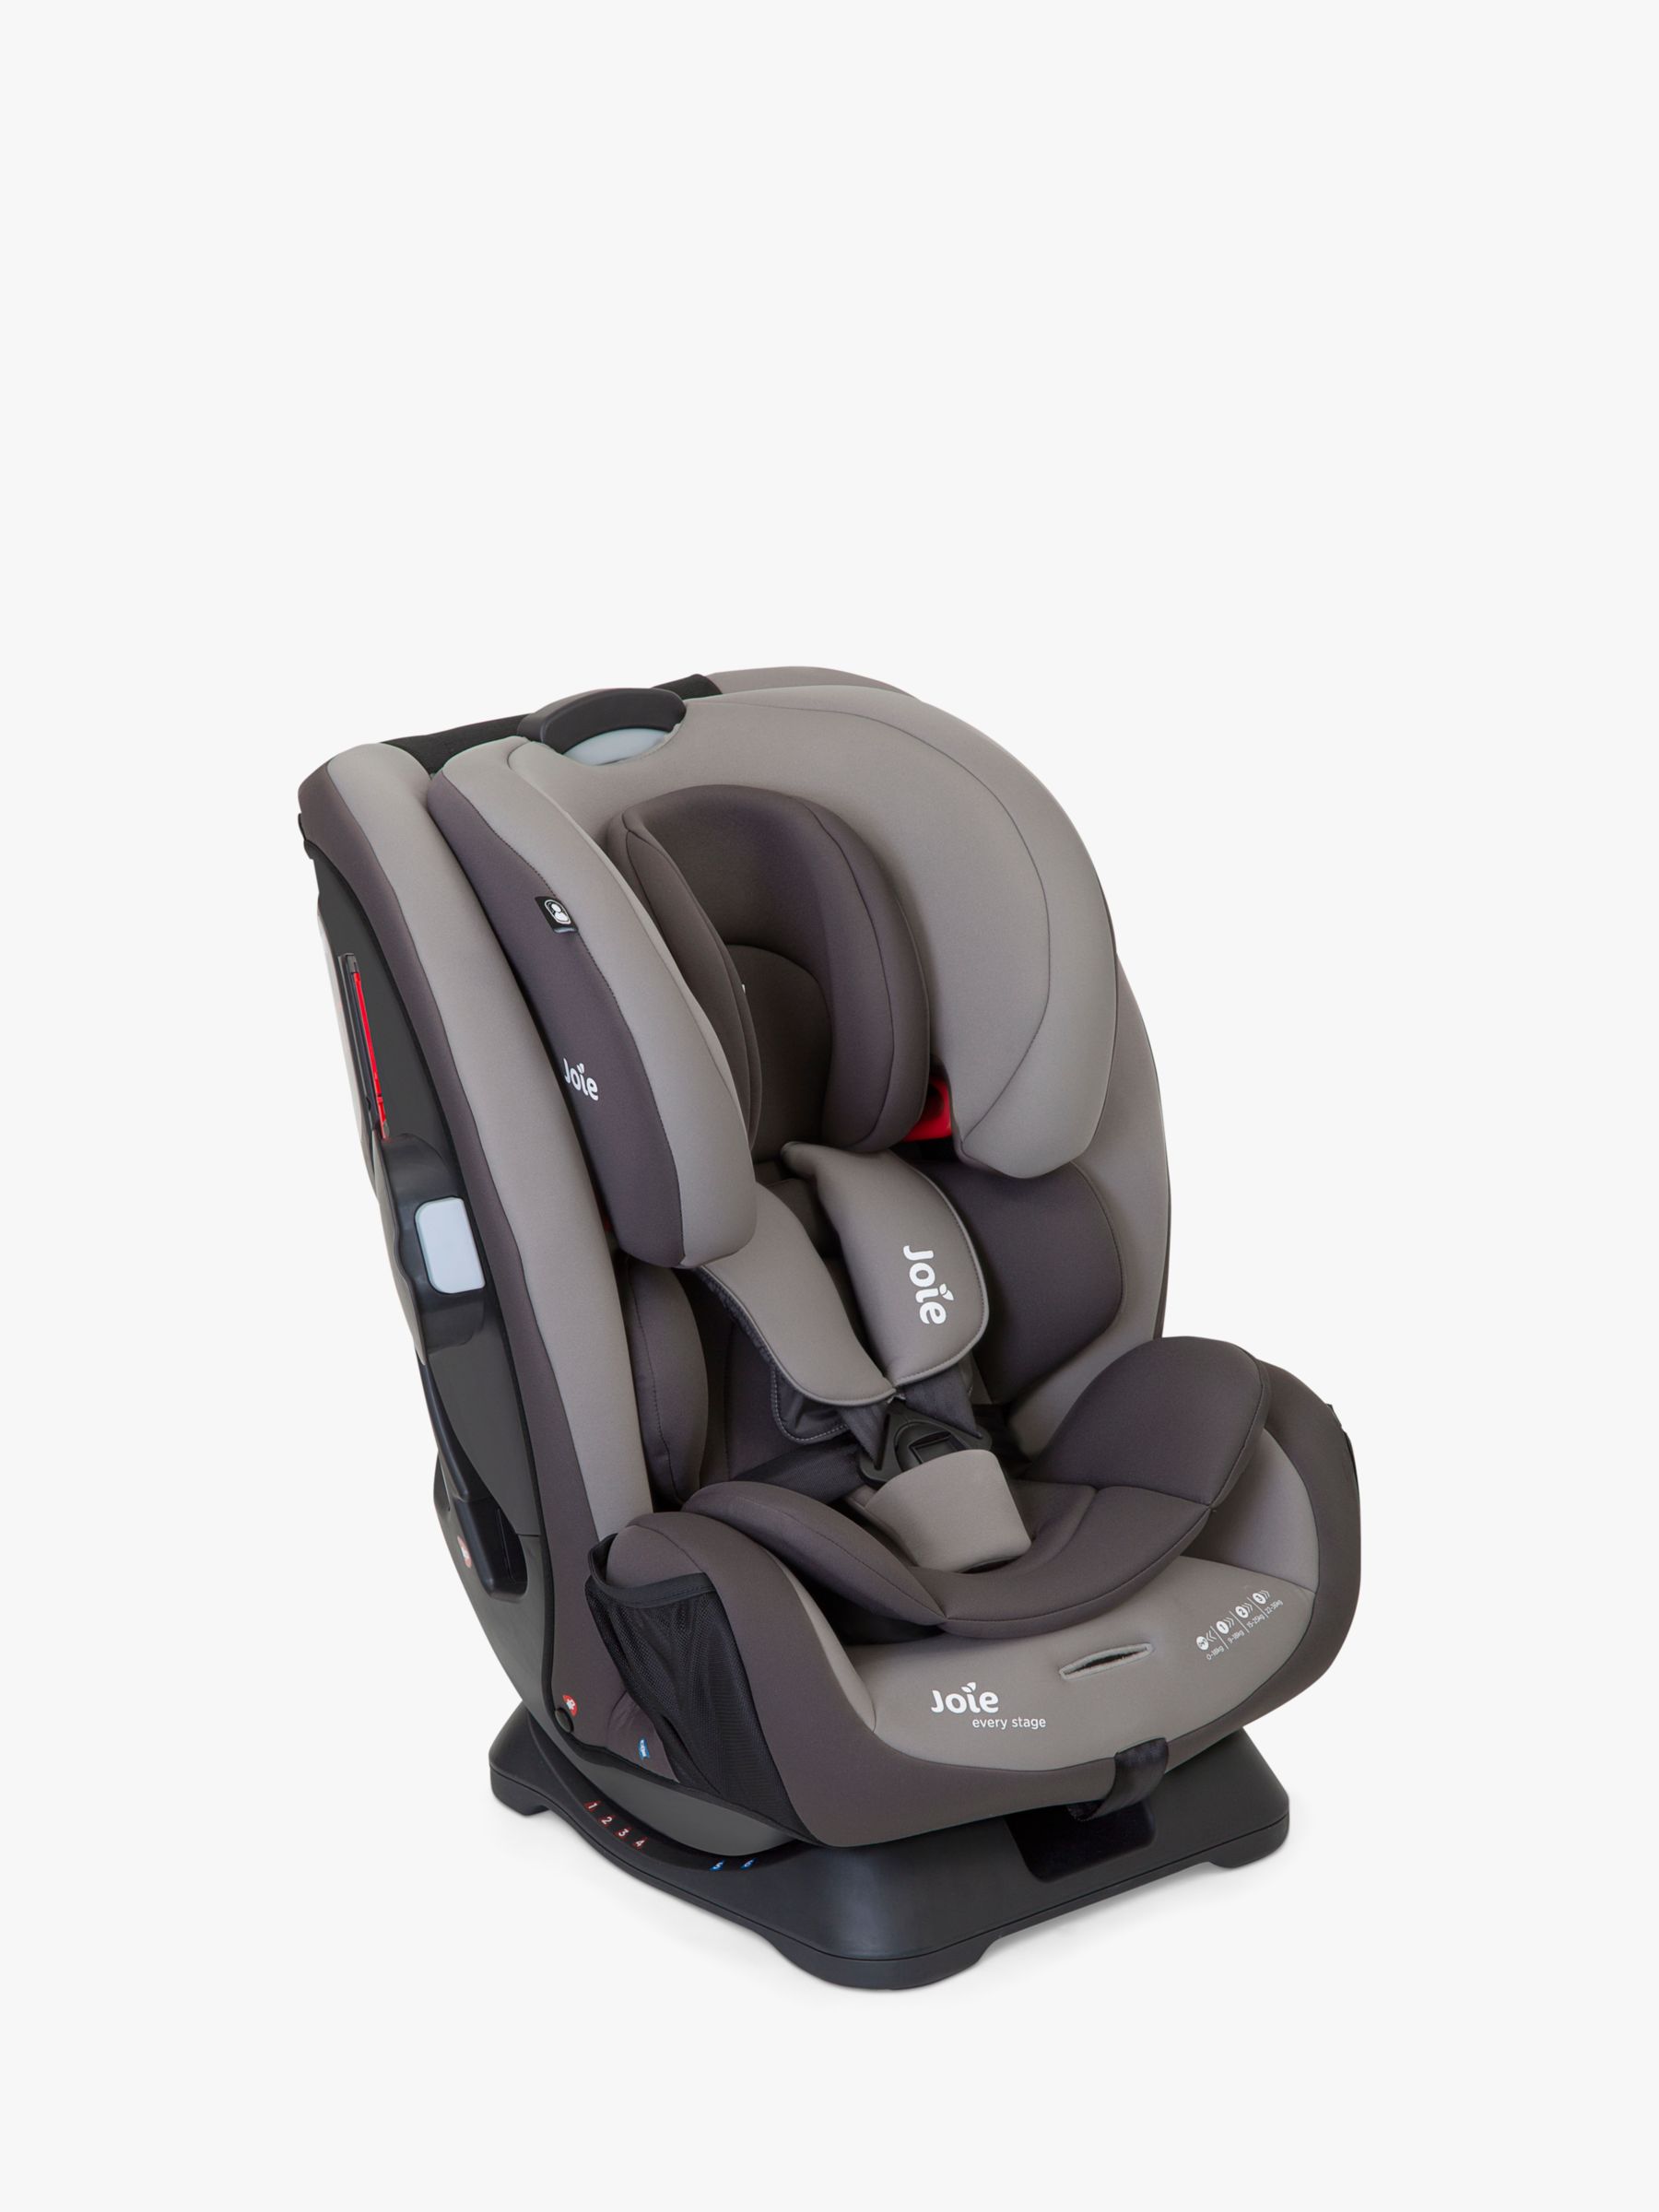 Joie Baby Every Stage Group 0+/1/2/3 Car Seat, Dark Pewter at John ...